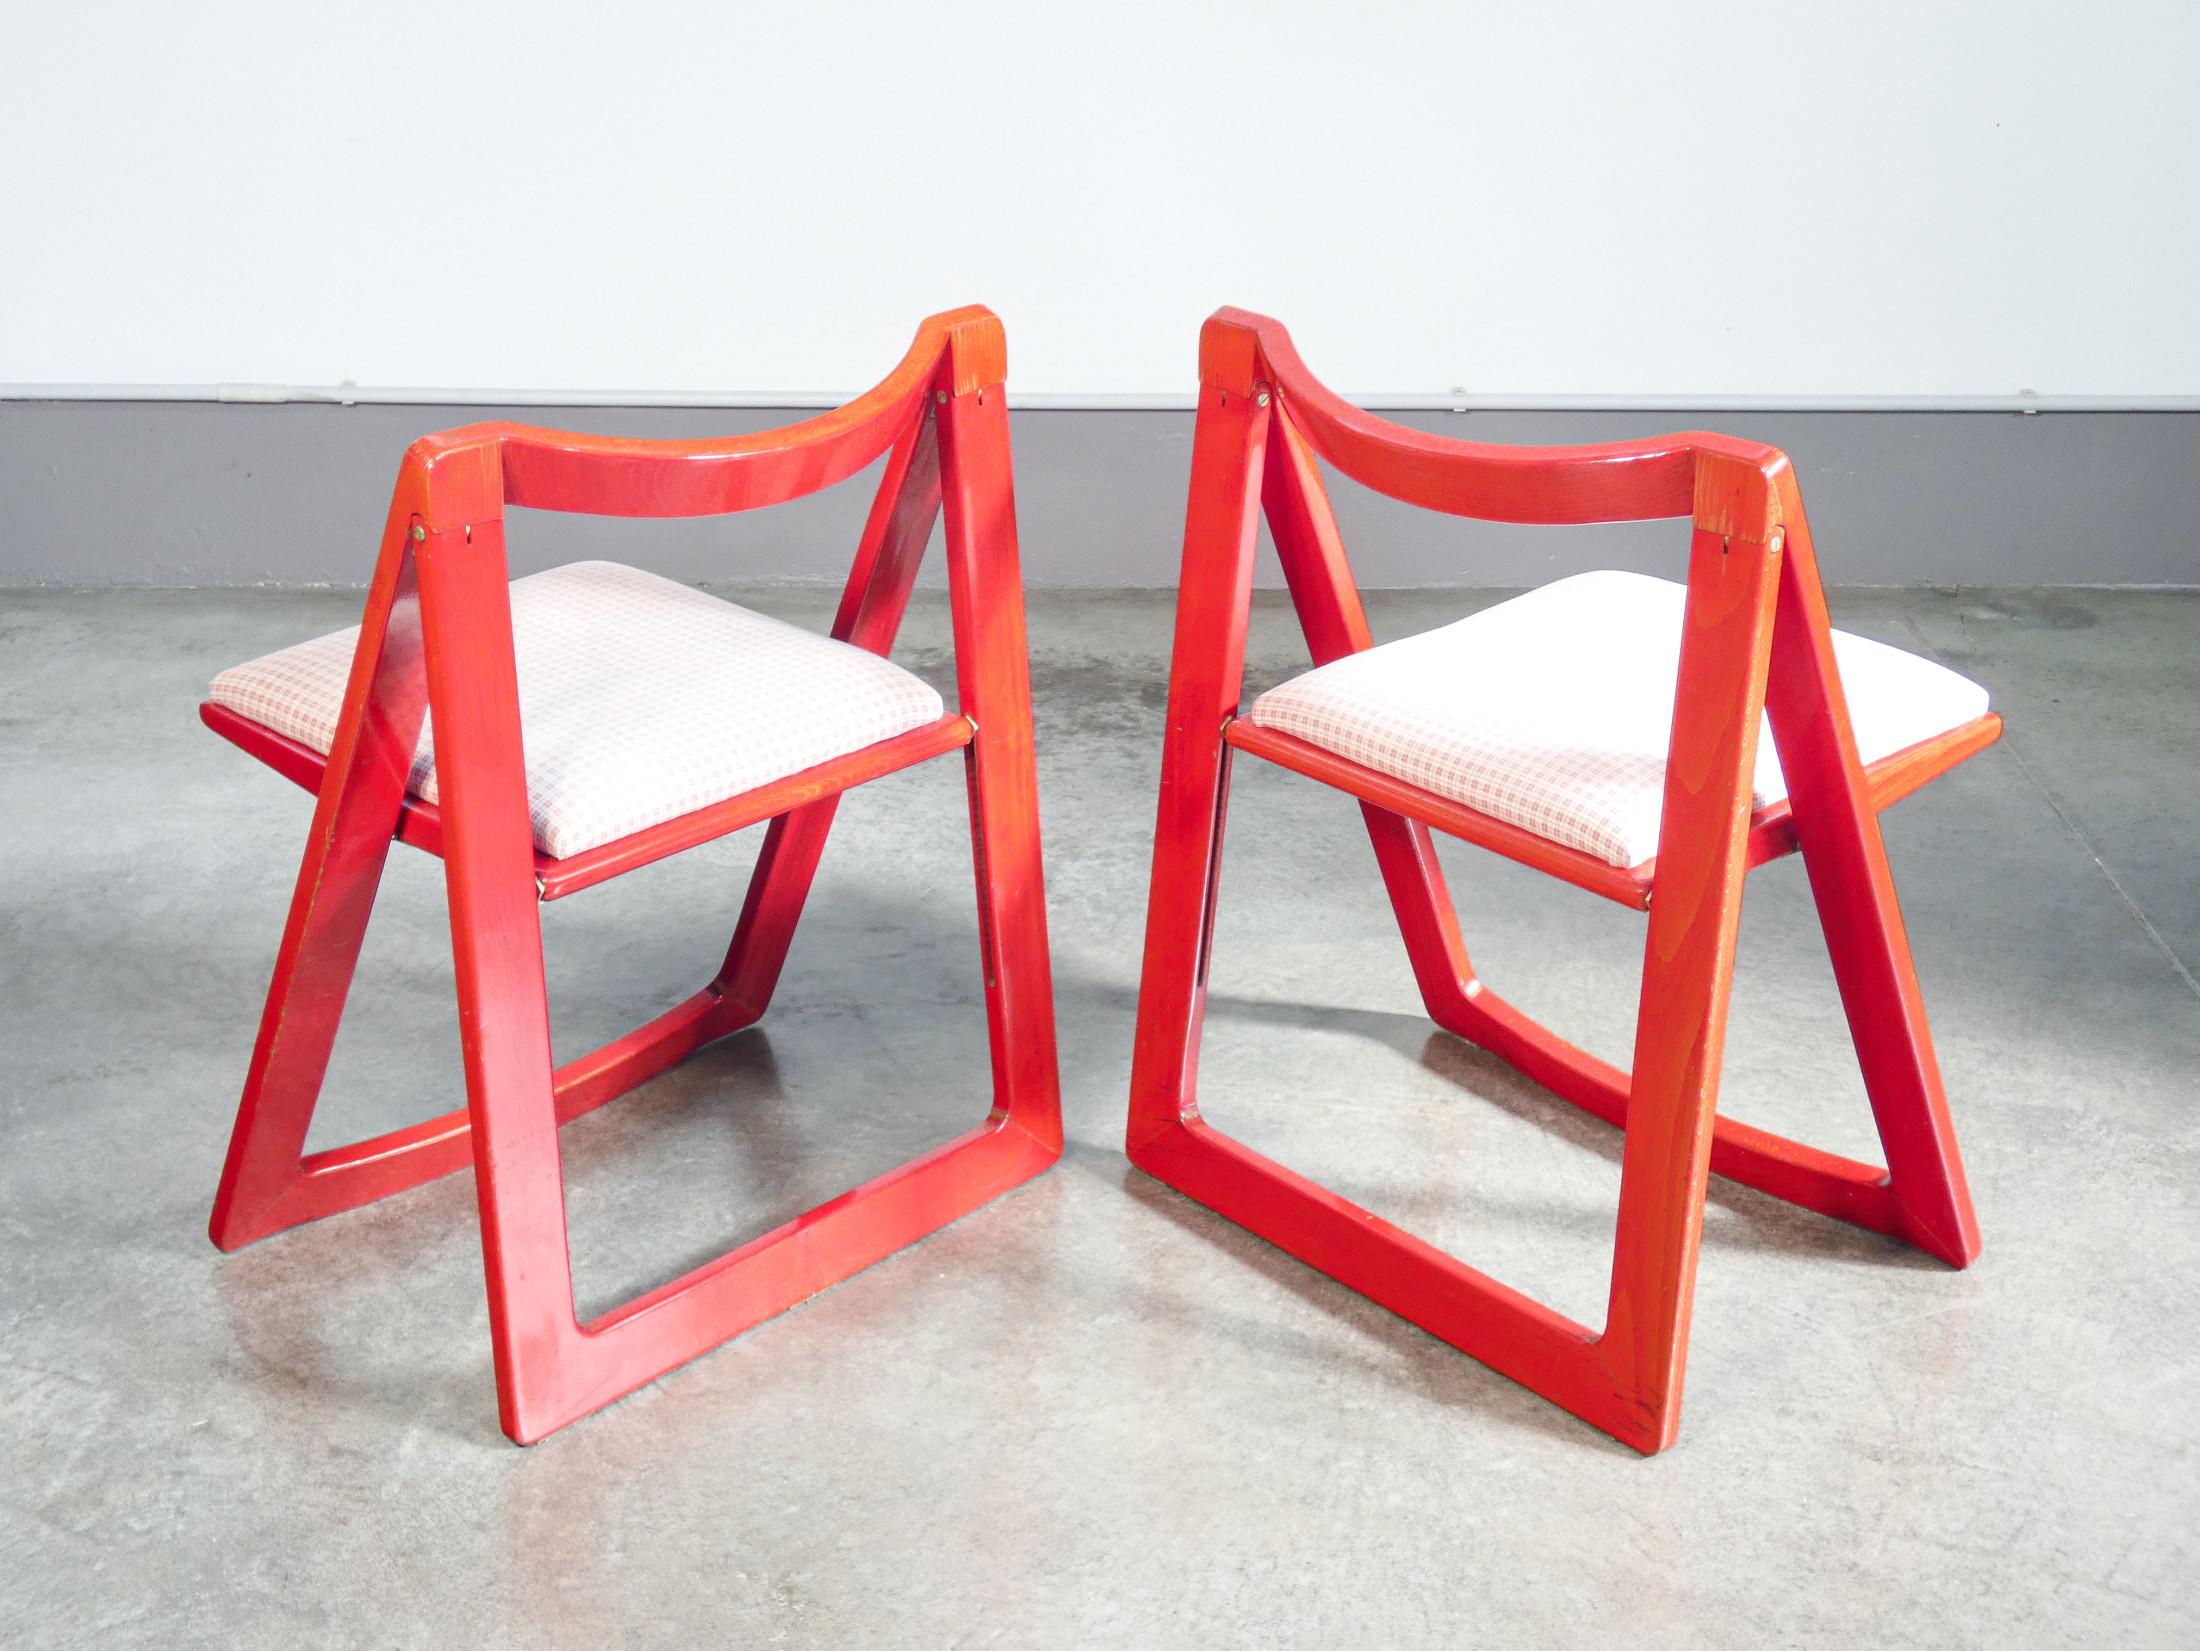 Wood Set of four TRIESTE chairs, designed by D'ANIELLO & JACOBER for BAZZANI, red. '66 For Sale